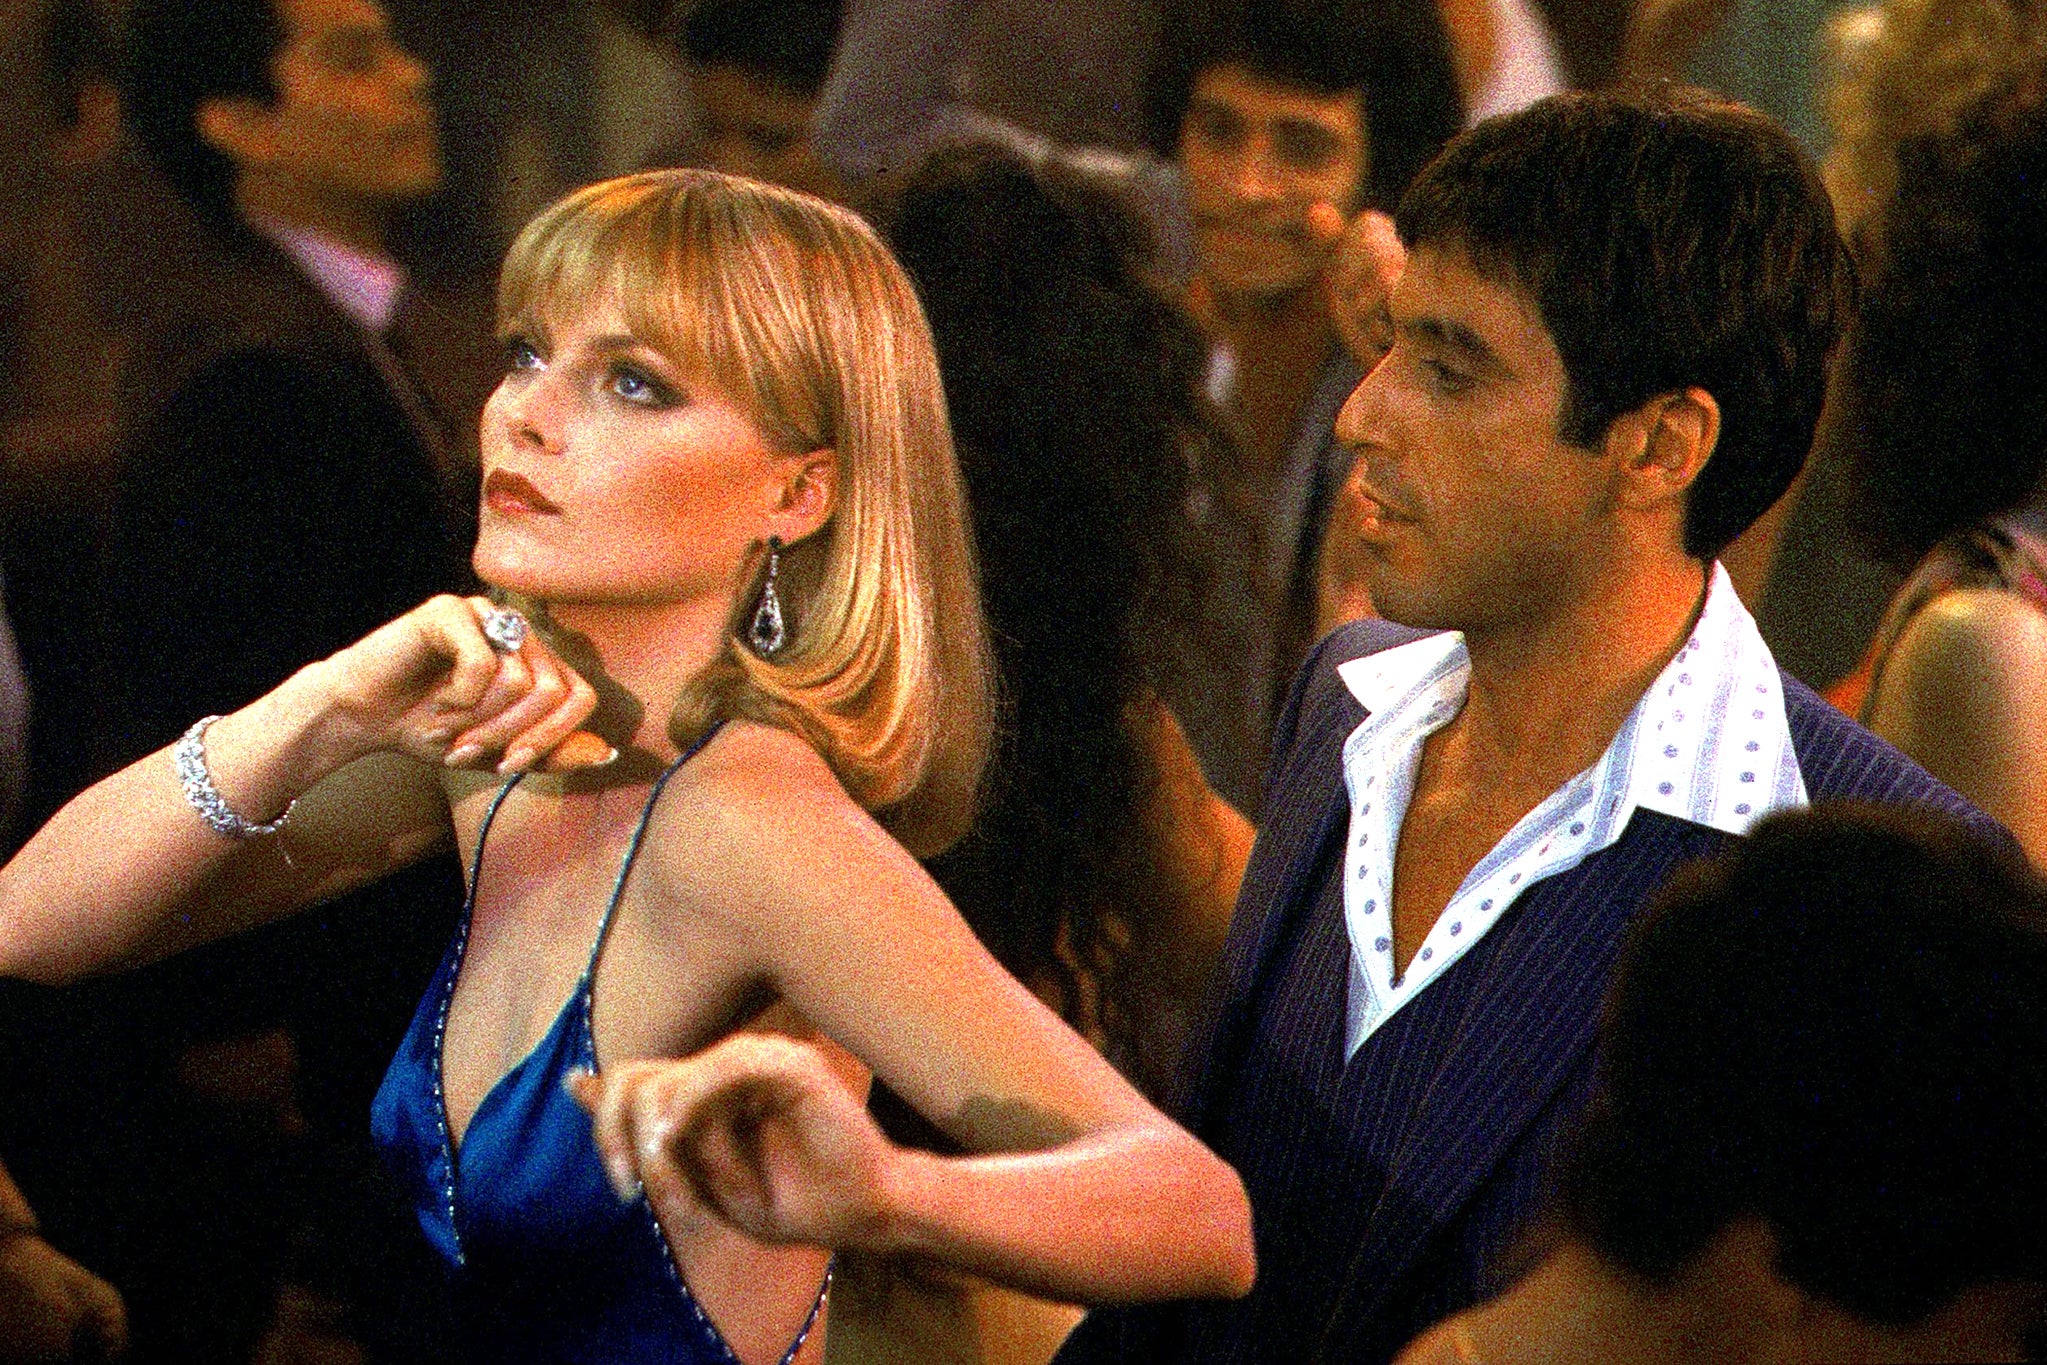 Ultra violence with a hint of disco-era high camp: Michelle Pfeiffer and Al Pacino in ‘Scarface’